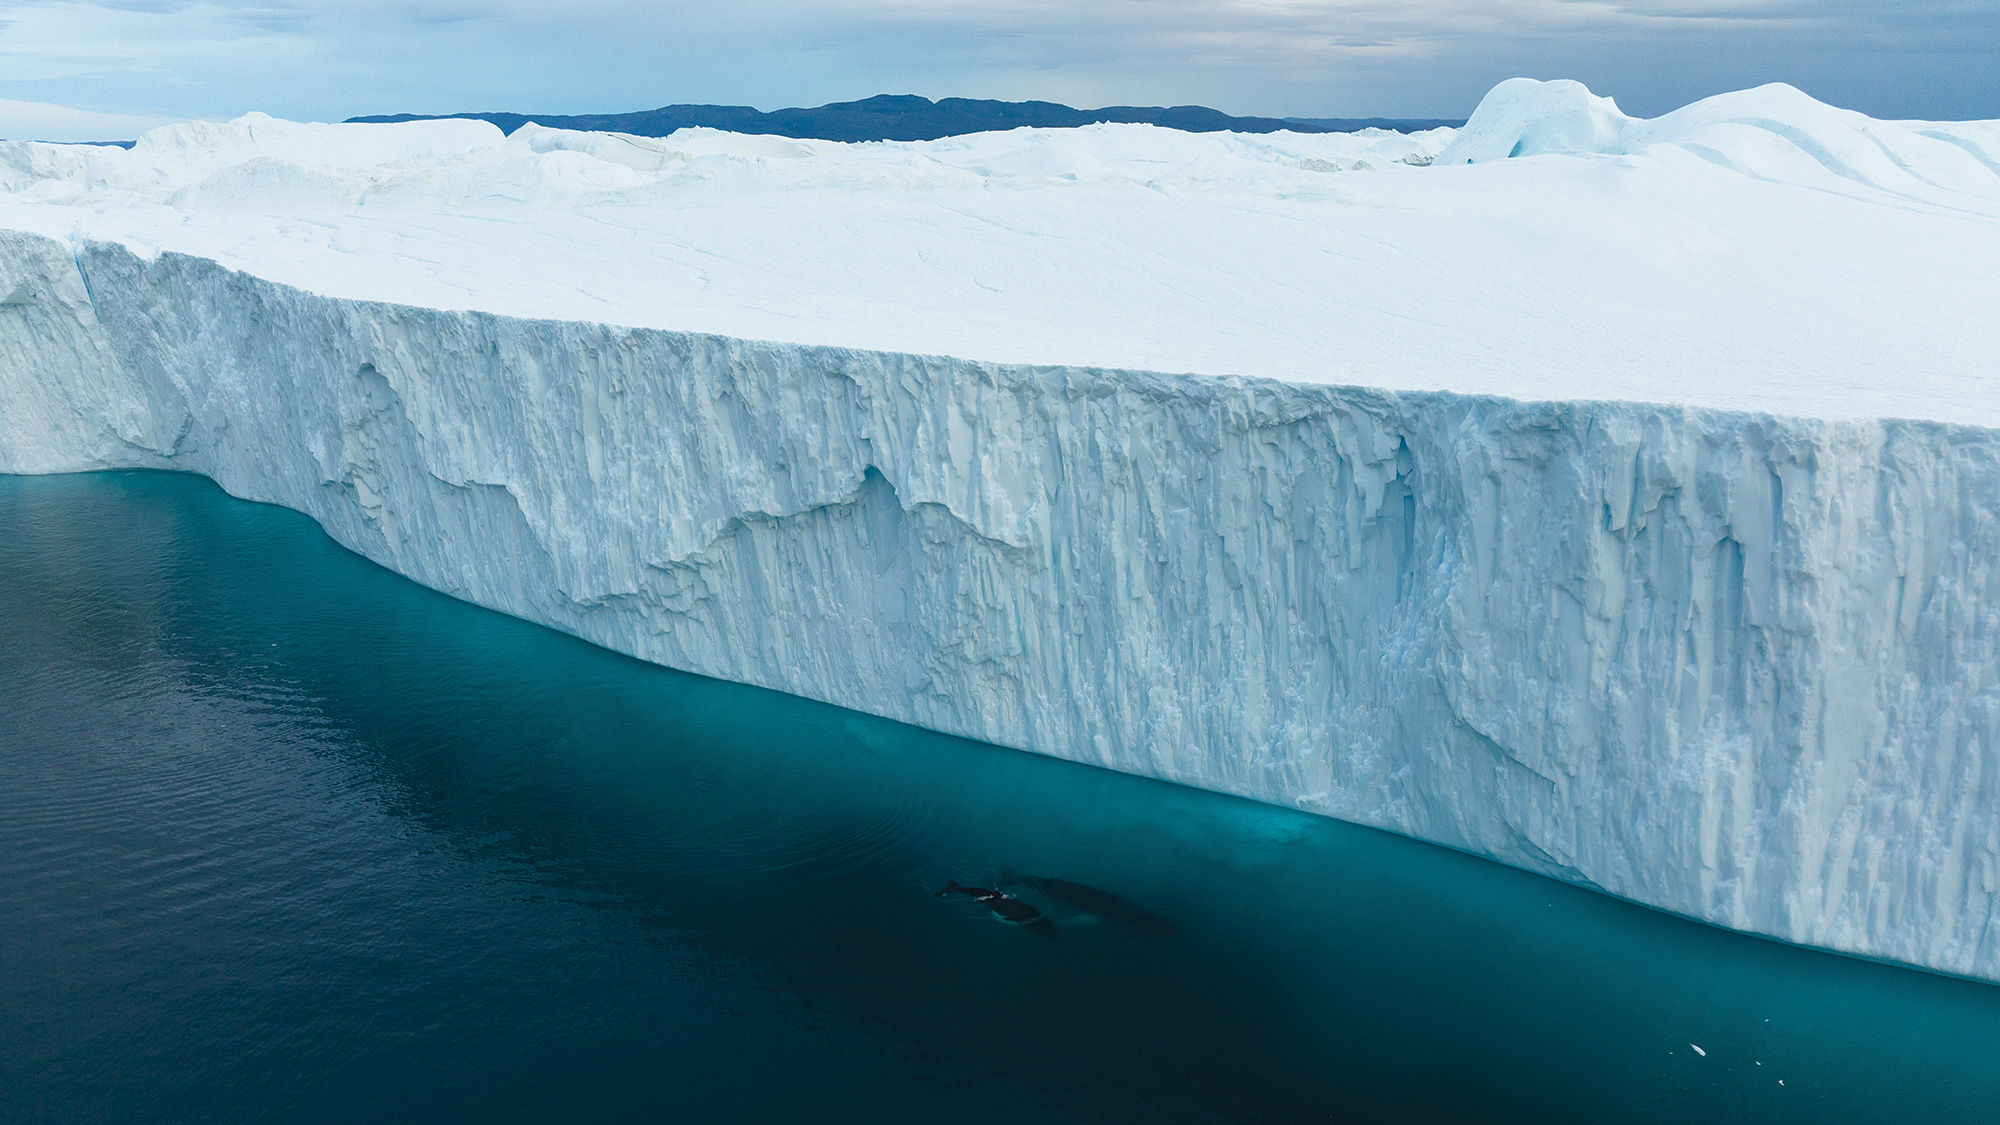 Humpback Icefjord near the town of Ilulissat.